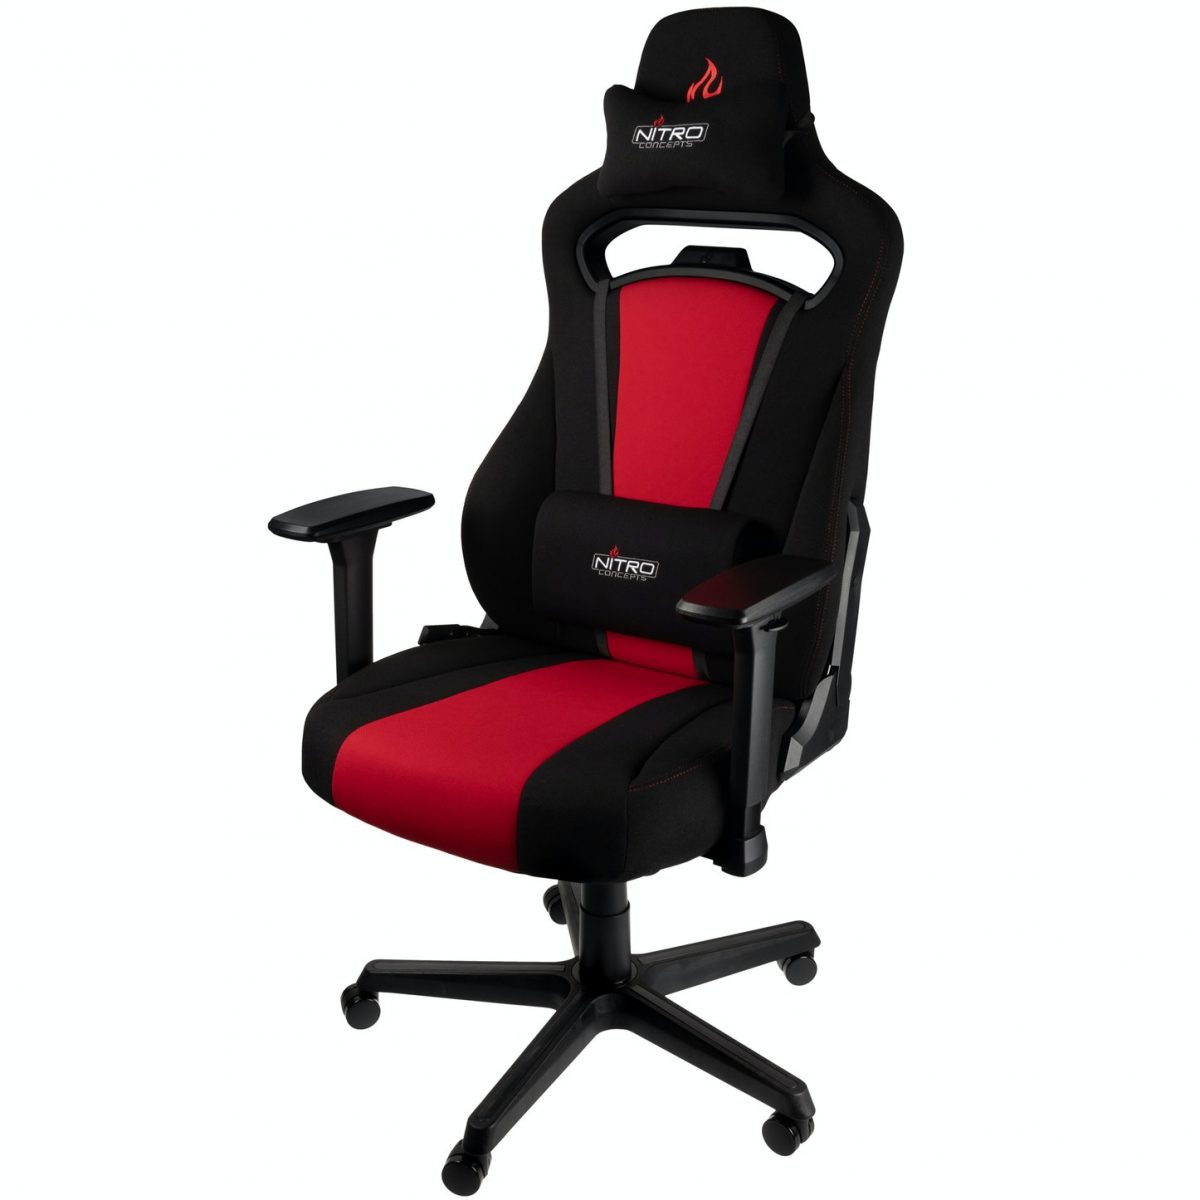 Nitro Concepts E250 Gaming Chair - Quality Fabric & Cold Foam - Black Red - Pro GamersWare 2.35.63.02.020